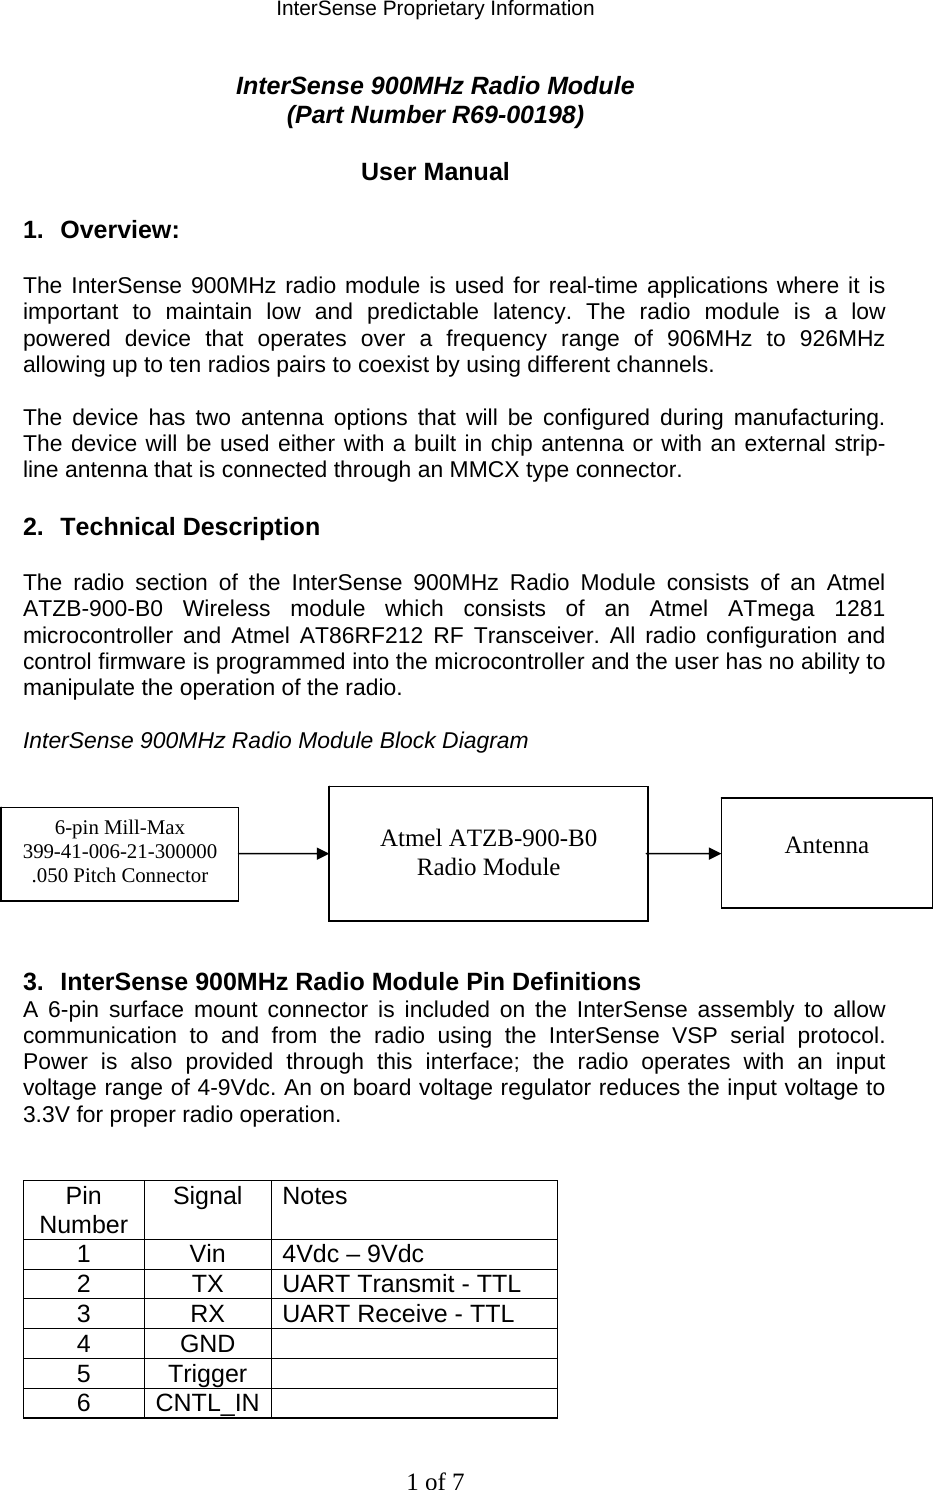 InterSense Proprietary Information 1 of 7 InterSense 900MHz Radio Module  (Part Number R69-00198)  User Manual  1. Overview:  The InterSense 900MHz radio module is used for real-time applications where it is important to maintain low and predictable latency. The radio module is a low powered device that operates over a frequency range of 906MHz to 926MHz allowing up to ten radios pairs to coexist by using different channels.   The device has two antenna options that will be configured during manufacturing. The device will be used either with a built in chip antenna or with an external strip-line antenna that is connected through an MMCX type connector.  2. Technical Description  The radio section of the InterSense 900MHz Radio Module consists of an Atmel ATZB-900-B0 Wireless module which consists of an Atmel ATmega 1281 microcontroller and Atmel AT86RF212 RF Transceiver. All radio configuration and control firmware is programmed into the microcontroller and the user has no ability to manipulate the operation of the radio.  InterSense 900MHz Radio Module Block Diagram         3.  InterSense 900MHz Radio Module Pin Definitions A 6-pin surface mount connector is included on the InterSense assembly to allow communication to and from the radio using the InterSense VSP serial protocol. Power is also provided through this interface; the radio operates with an input voltage range of 4-9Vdc. An on board voltage regulator reduces the input voltage to 3.3V for proper radio operation.   Pin Number  Signal Notes 1  Vin  4Vdc – 9Vdc 2  TX  UART Transmit - TTL 3  RX  UART Receive - TTL 4 GND  5 Trigger  6 CNTL_IN   Atmel ATZB-900-B0 Radio Module  Antenna 6-pin Mill-Max 399-41-006-21-300000 .050 Pitch Connector 